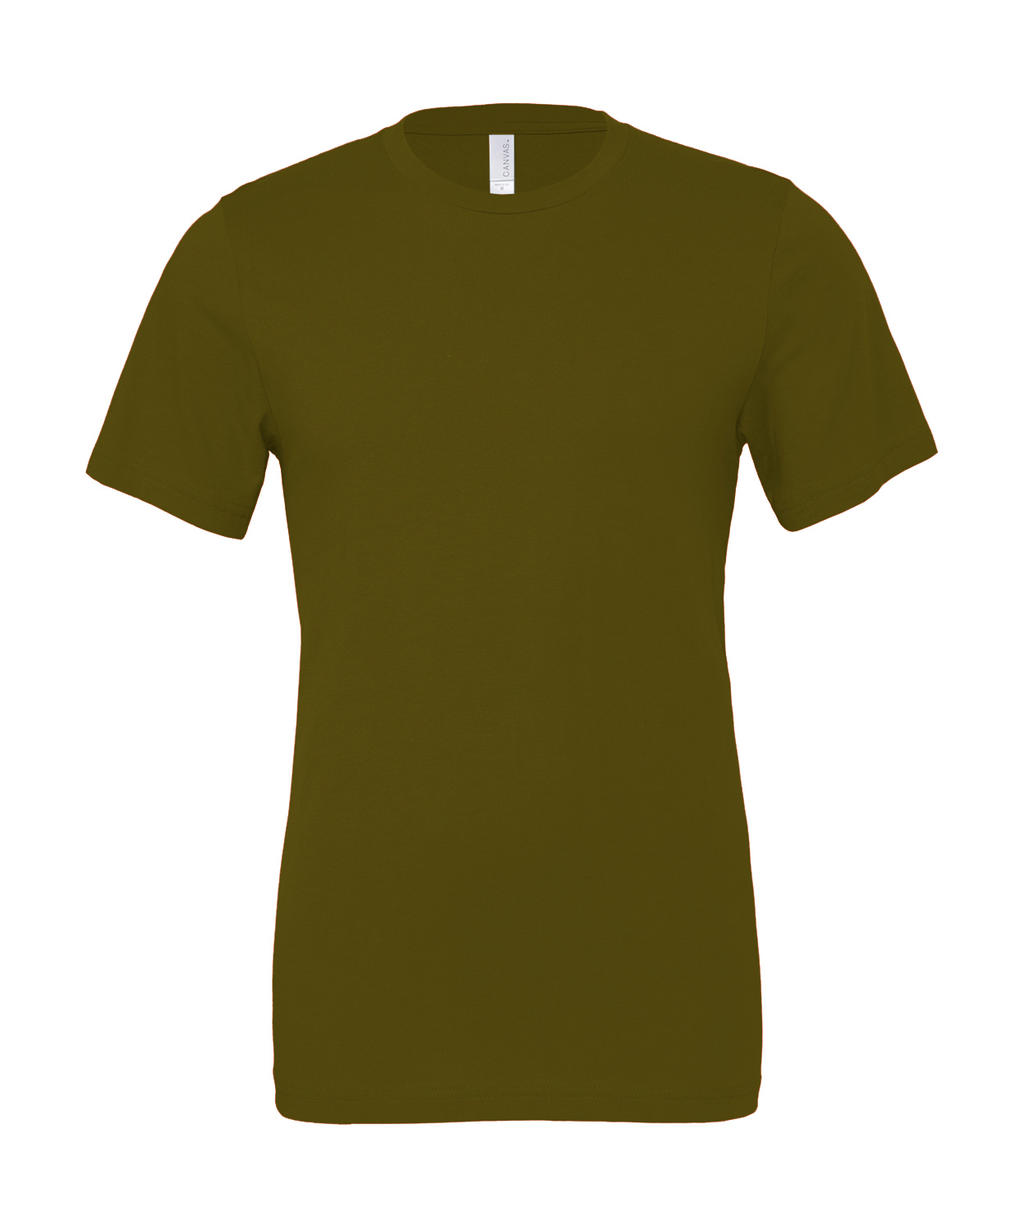  Unisex Jersey Short Sleeve Tee in Farbe Army